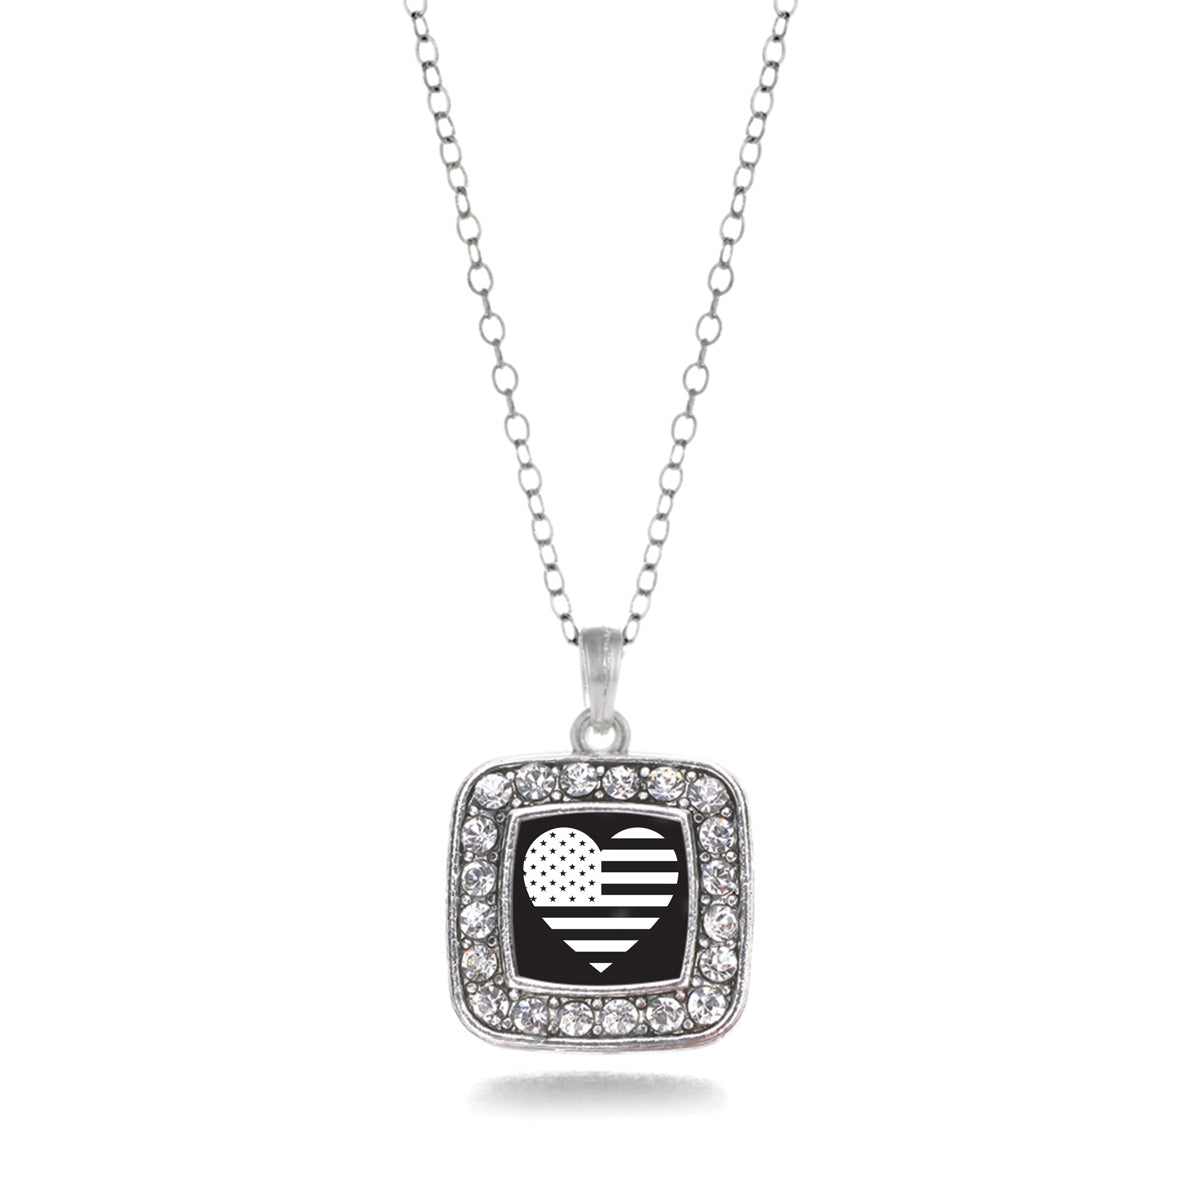 Silver Black and White USA Flag Heart Square Charm Classic Necklace